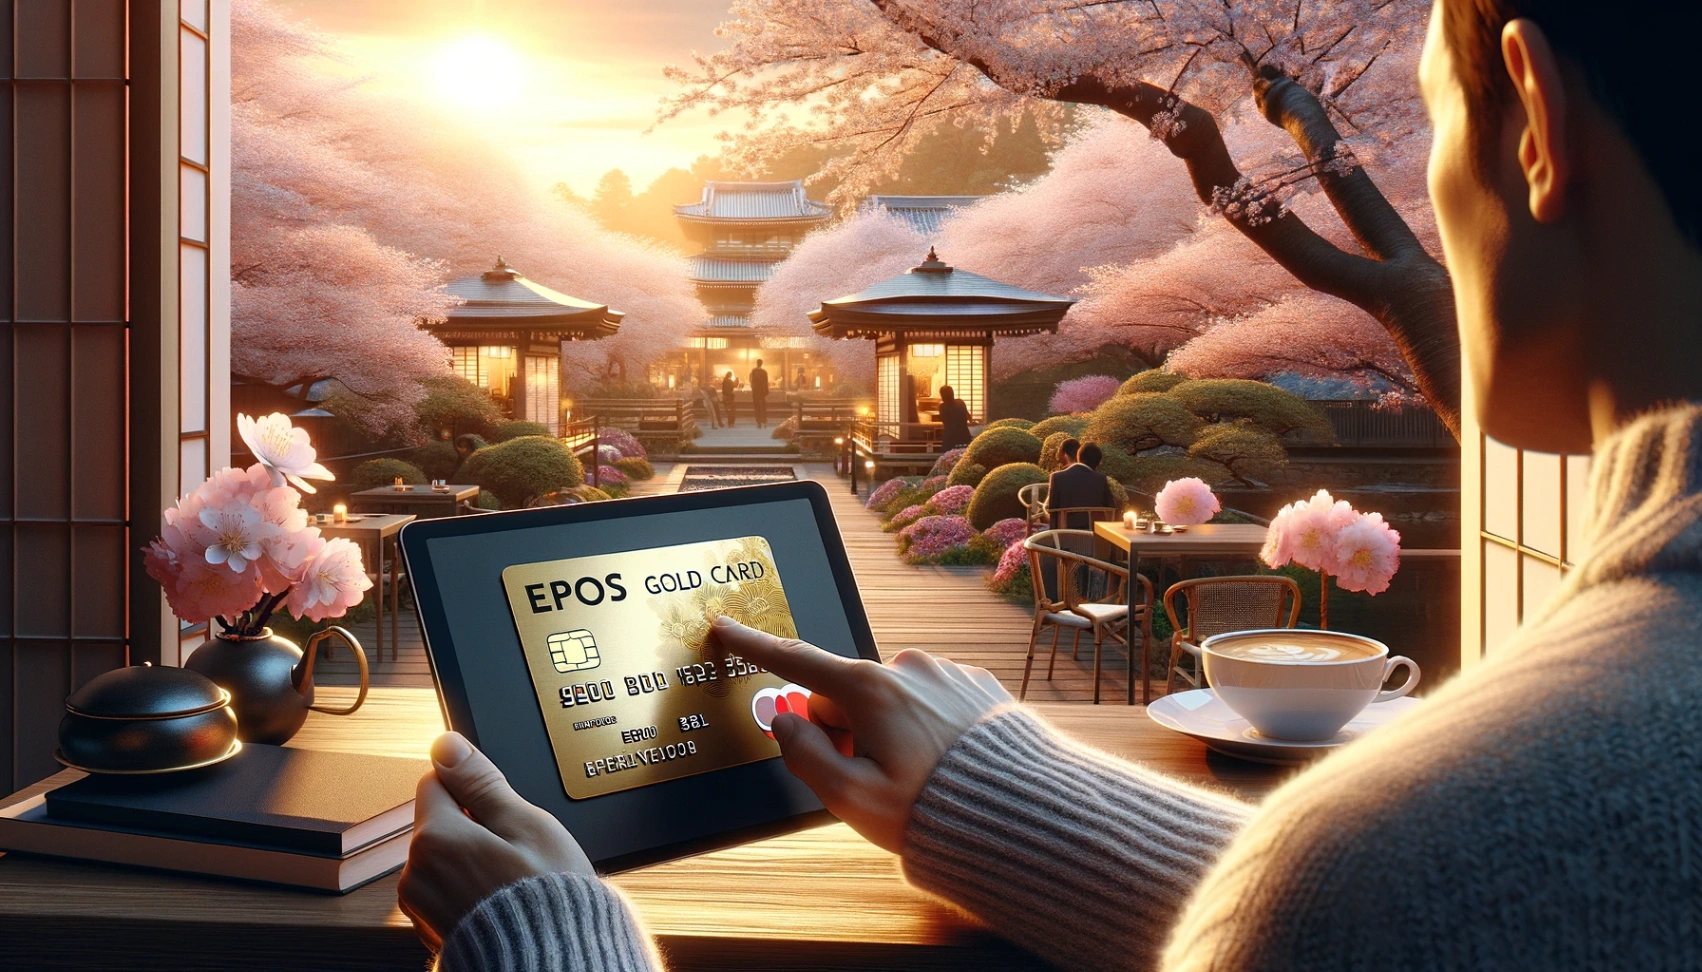 Epos Gold Credit Card - Learn How to Apply